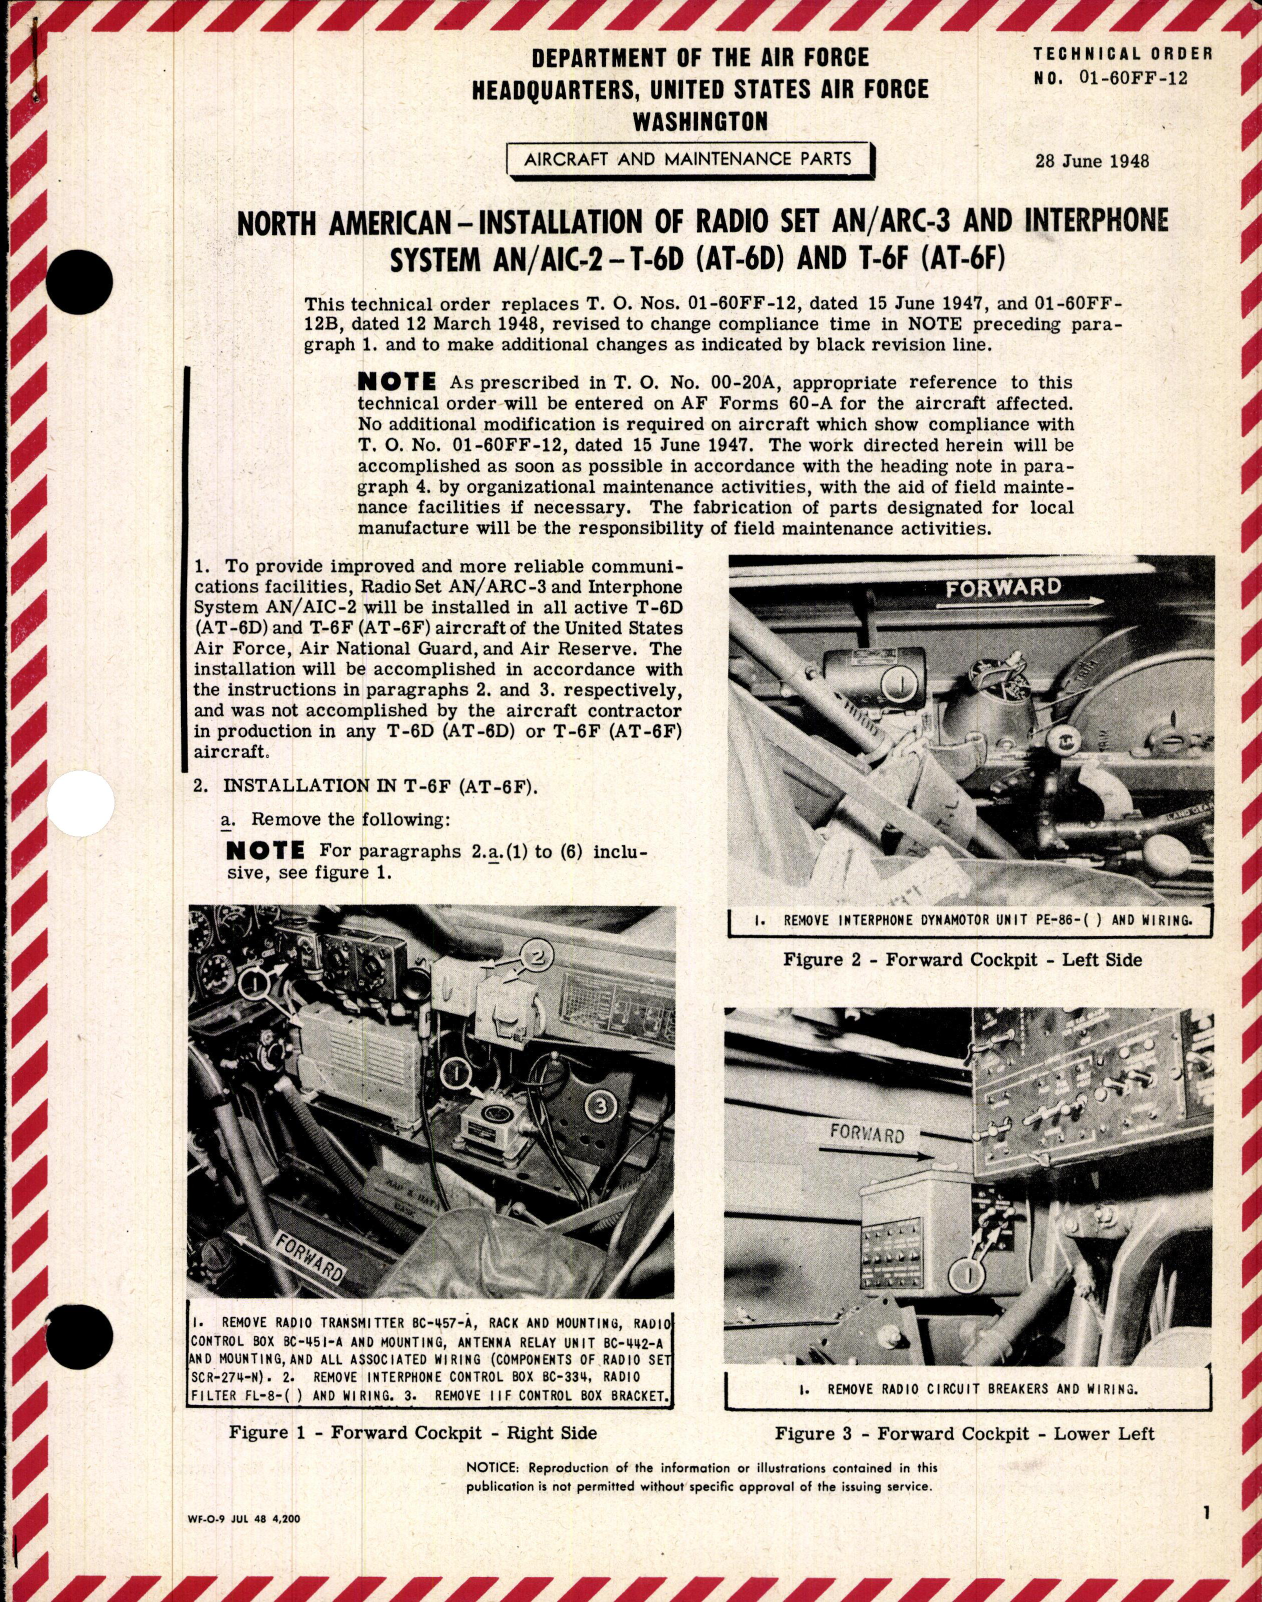 Sample page 1 from AirCorps Library document: Installation of Radio Set AN/ARC-3 and Interphone System AN/AIC-2 for T-6D (AT-6D) and T-6F (AT-6F)